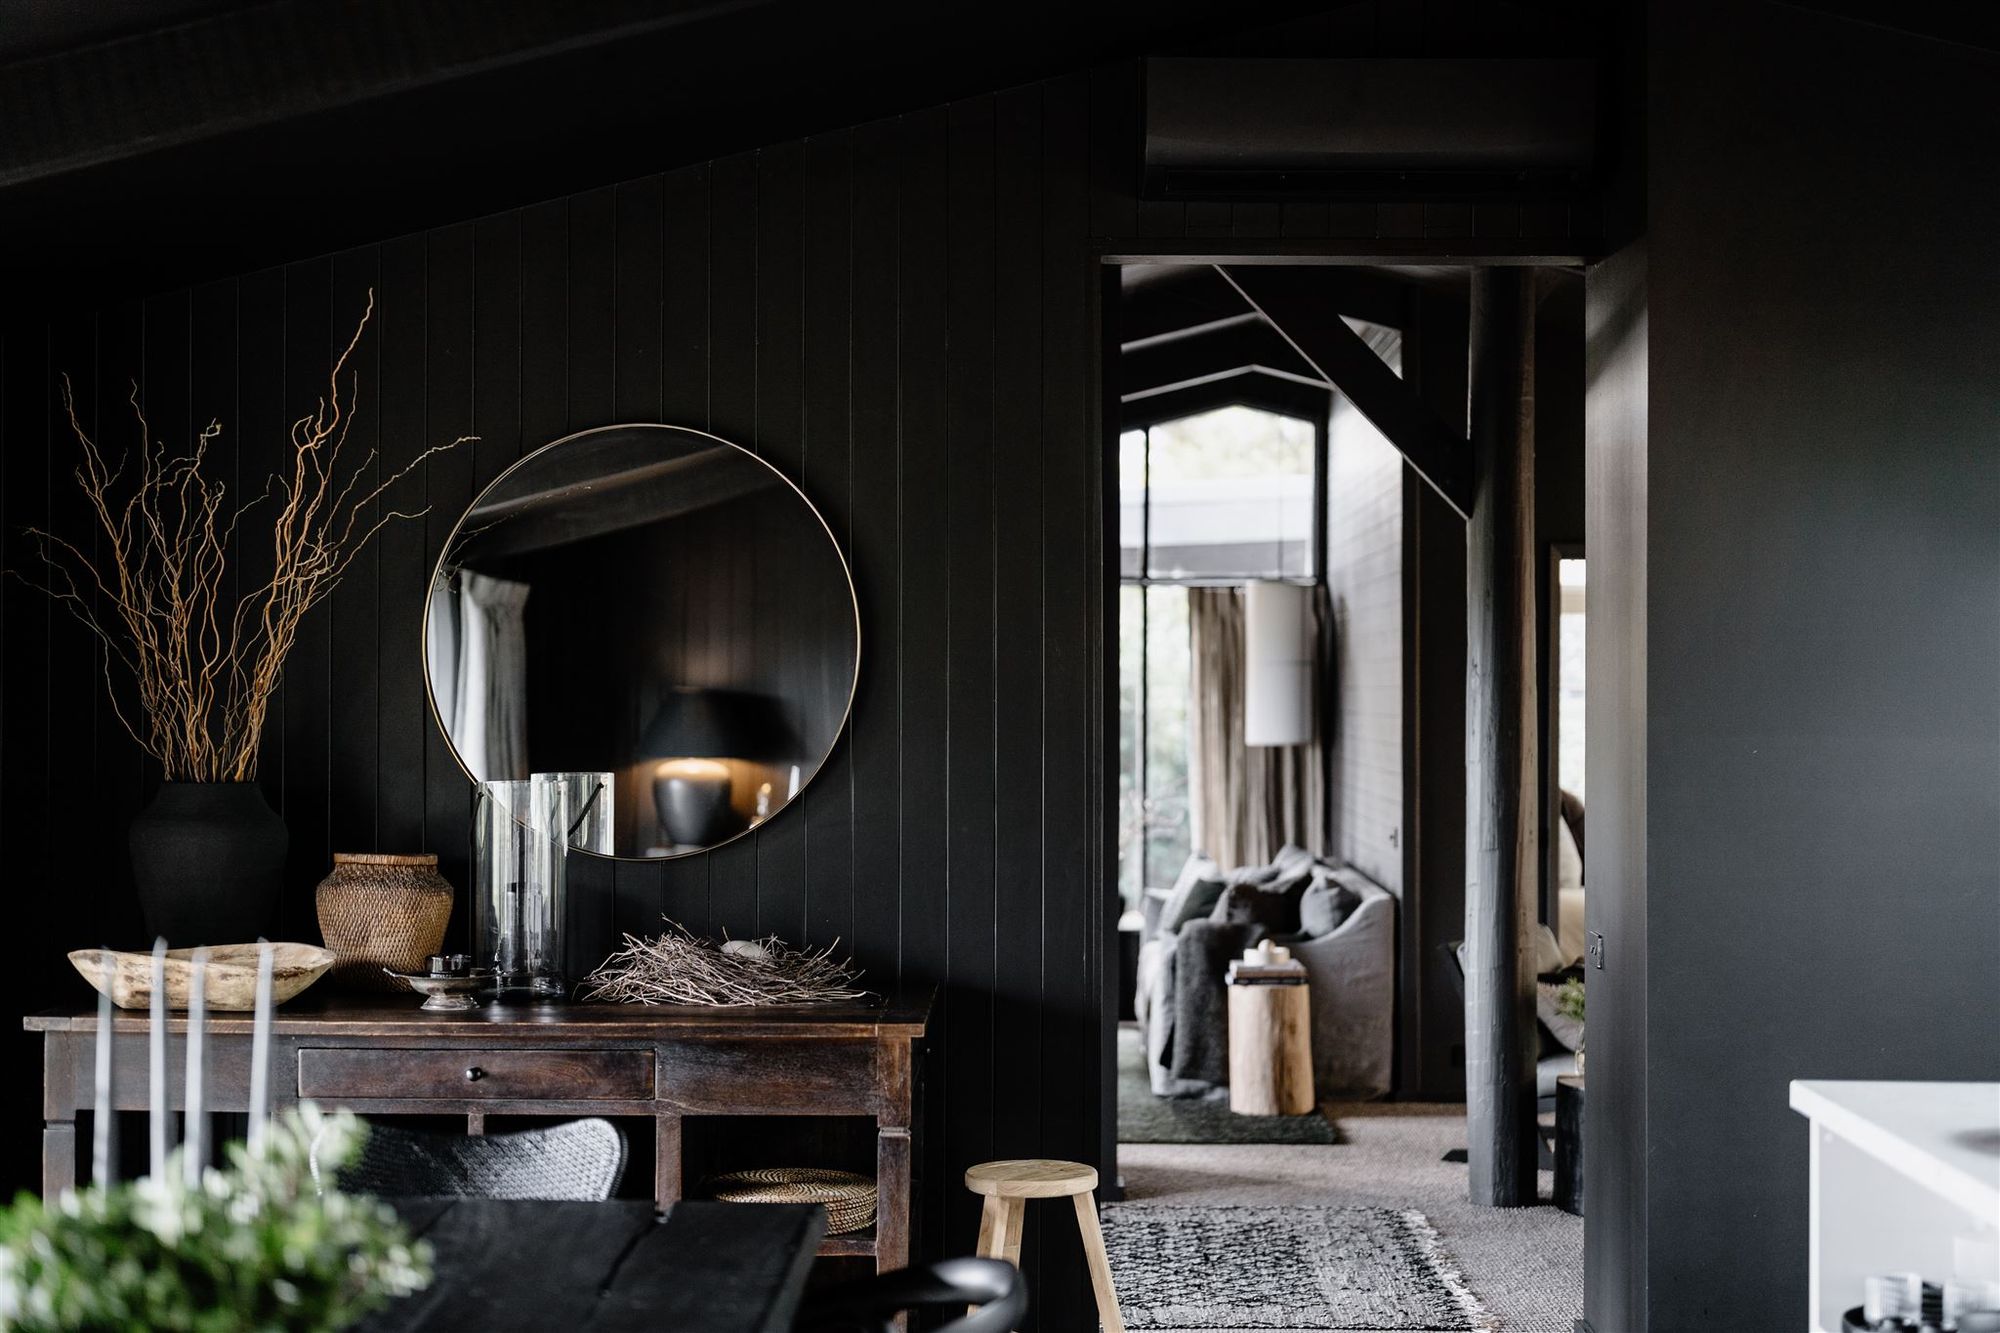 Jumoku Daylesford. Showing the dark interior of the holiday home